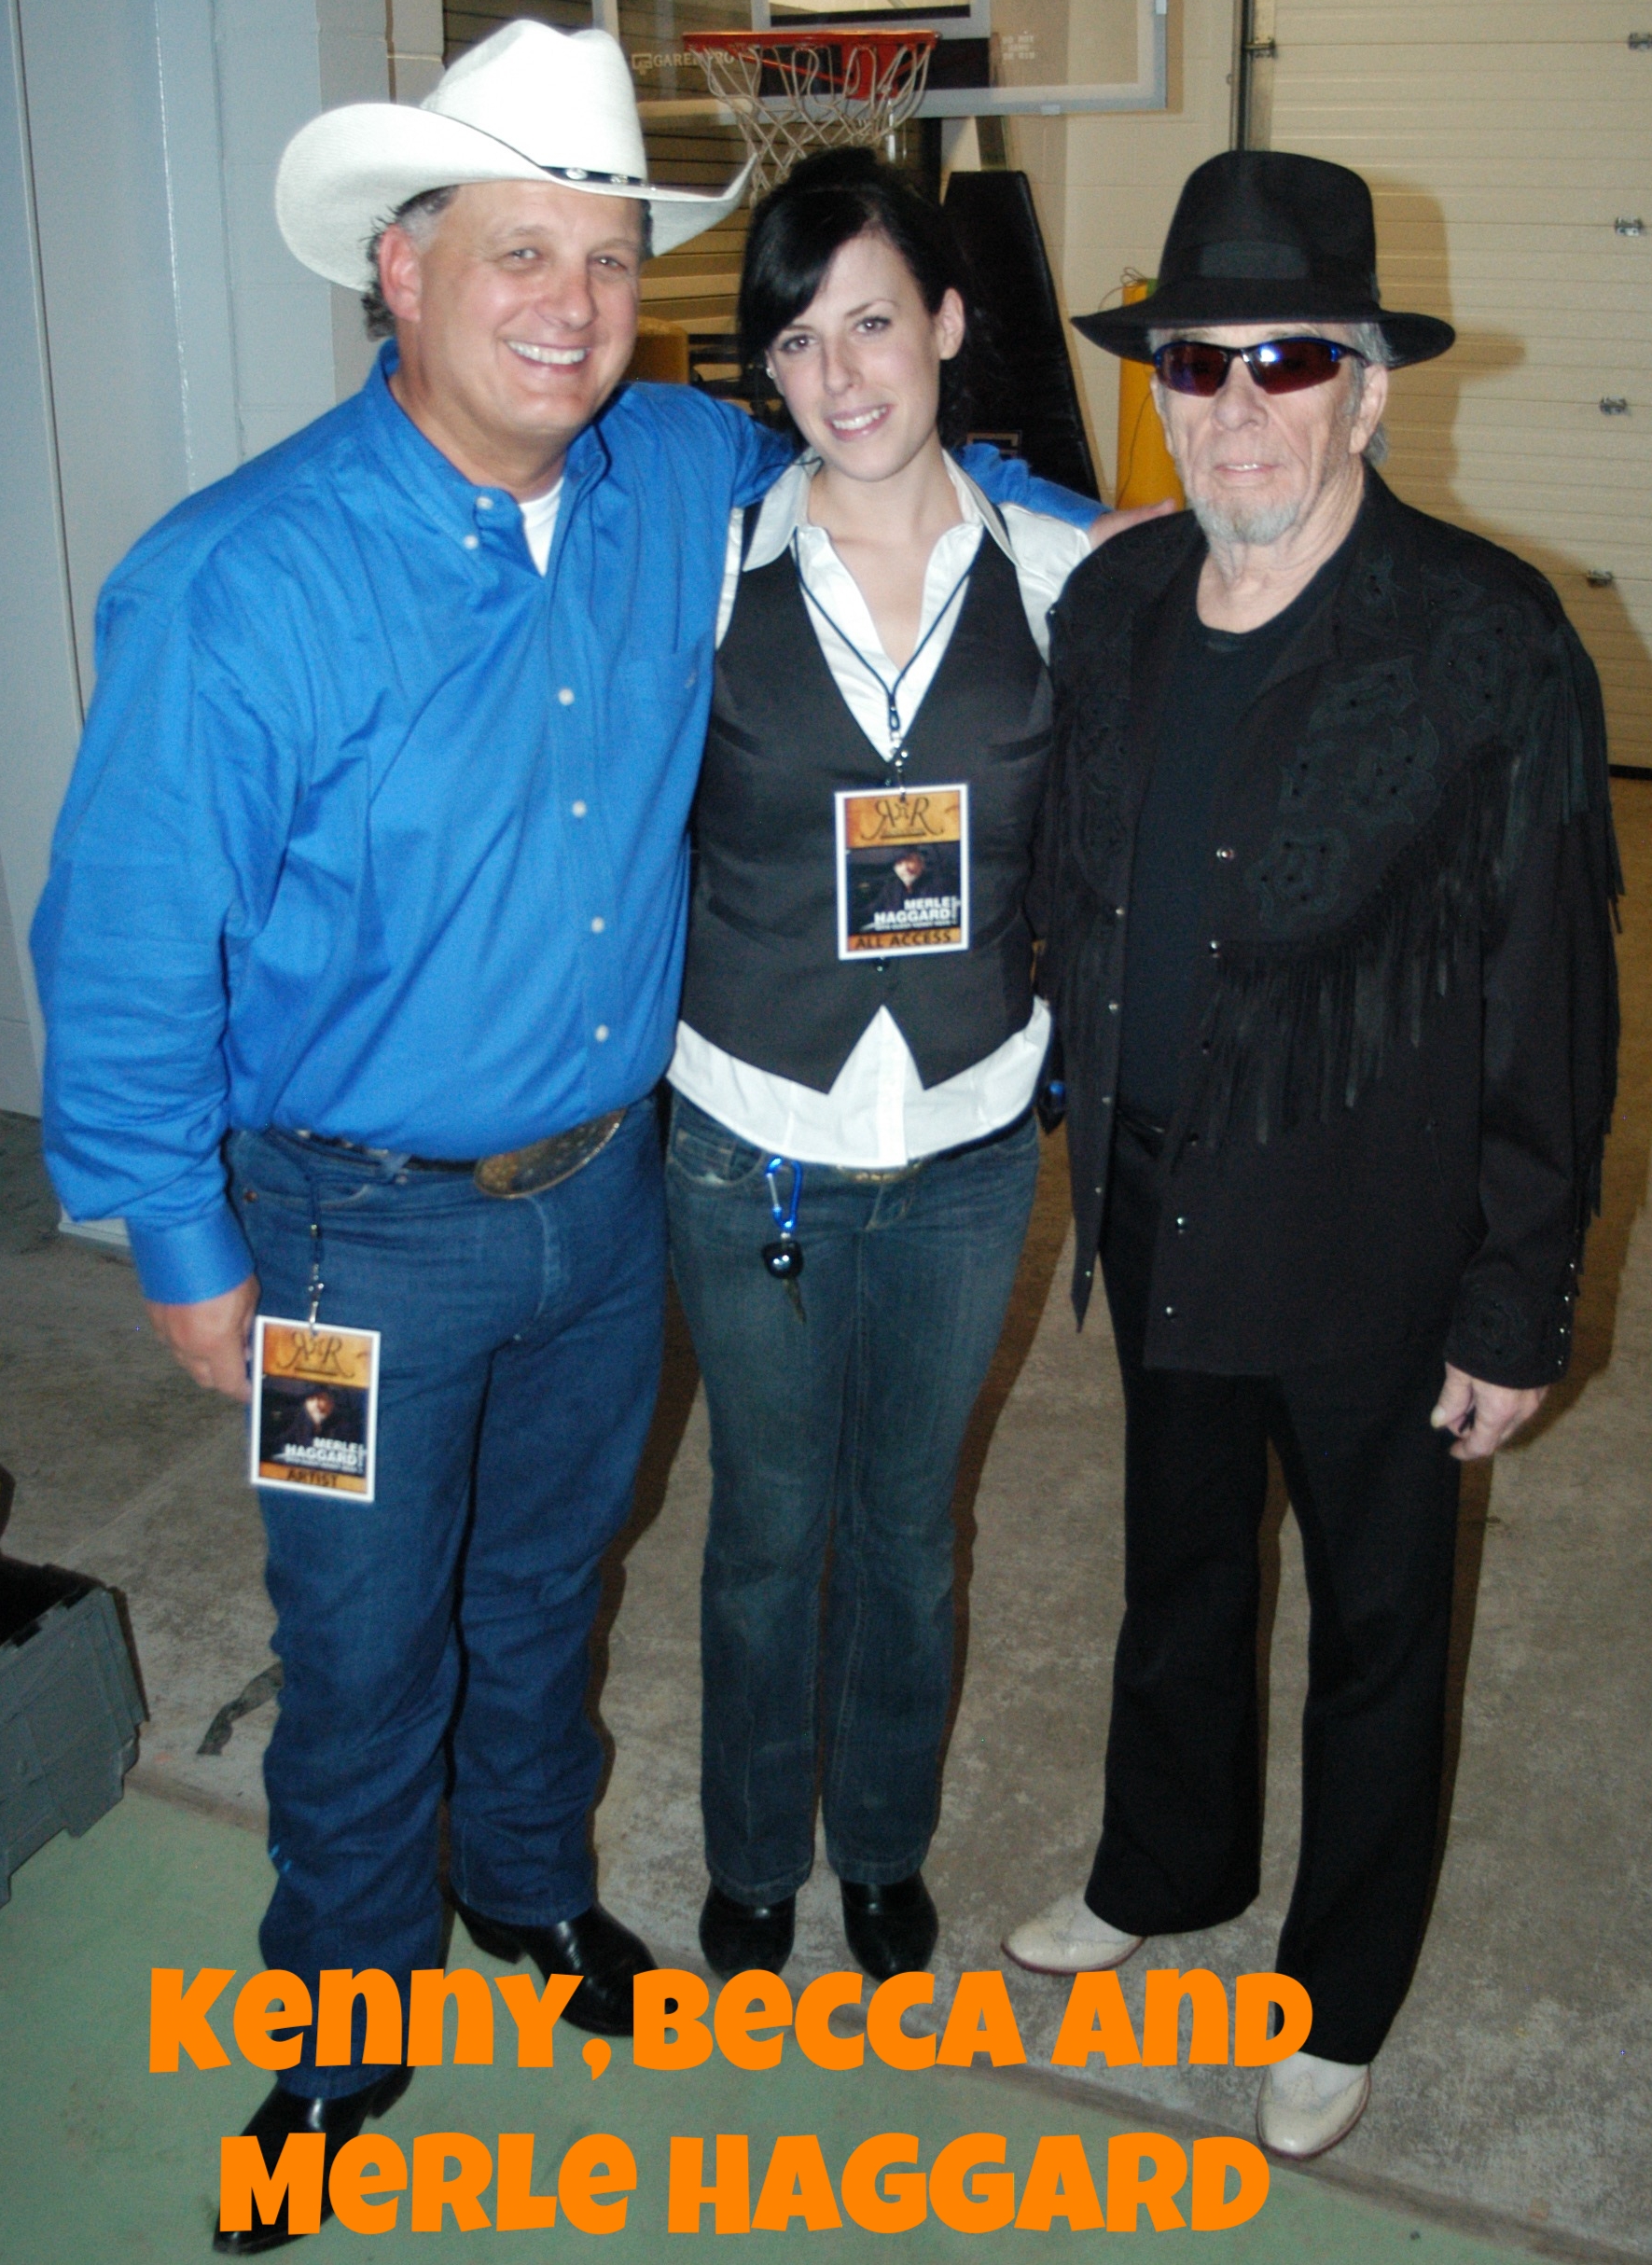  Kenny, Becca and Merle Haggard back stage 